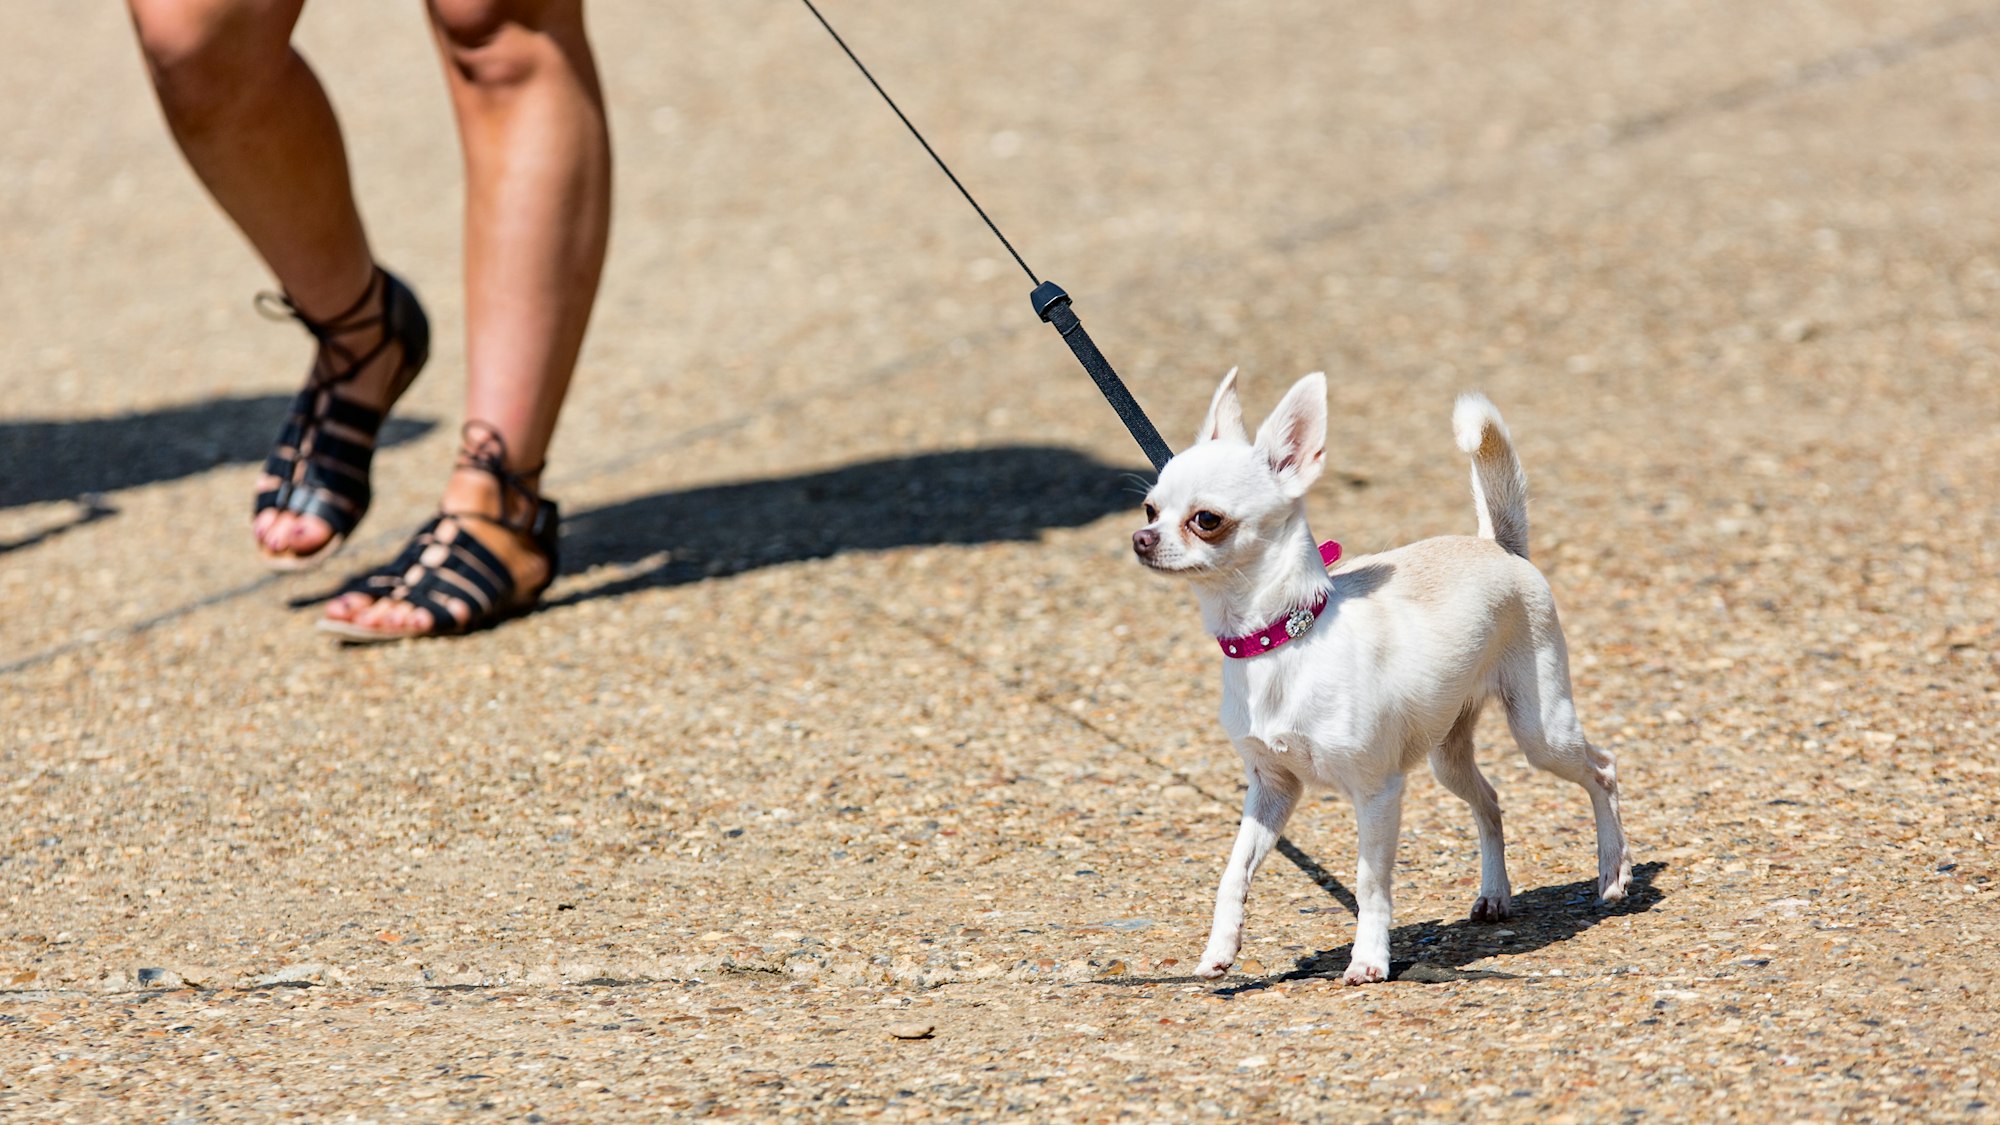 Protect your dog from attacks on walks